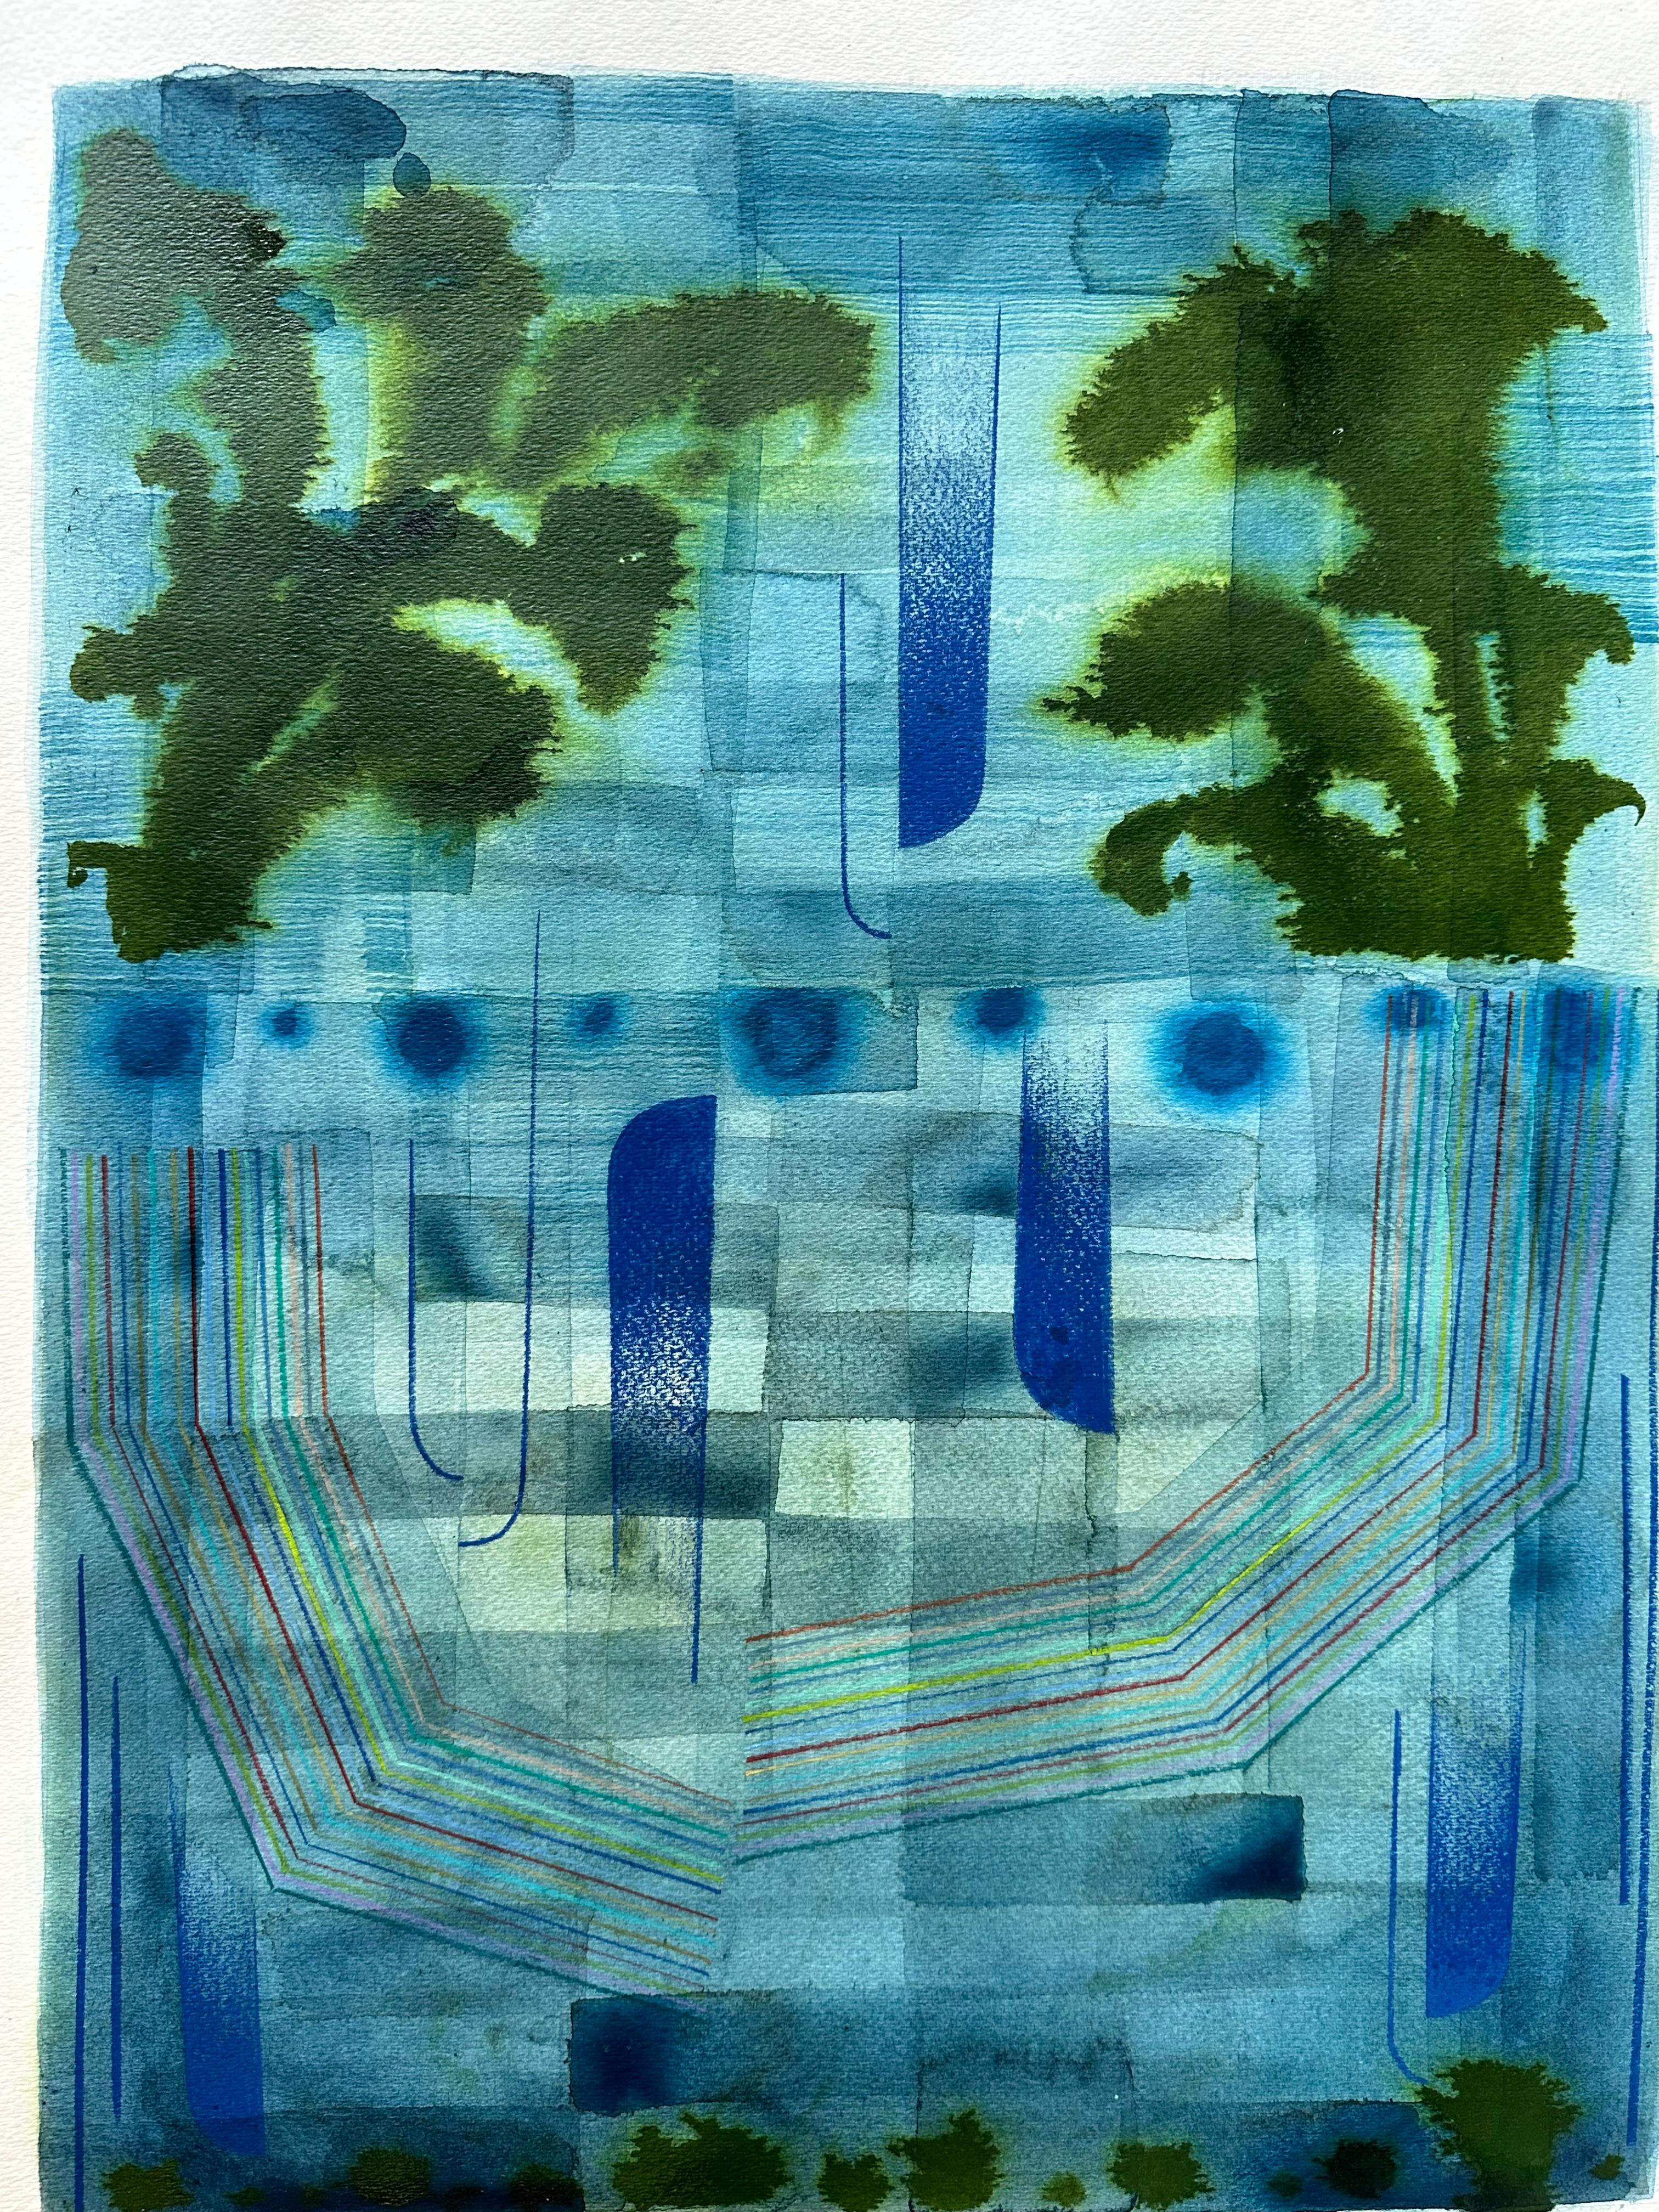 Untitled 606, Teal Blue, Dark Olive Green, Lapis Patterns, Abstract Landscape - Contemporary Art by Gabe Brown